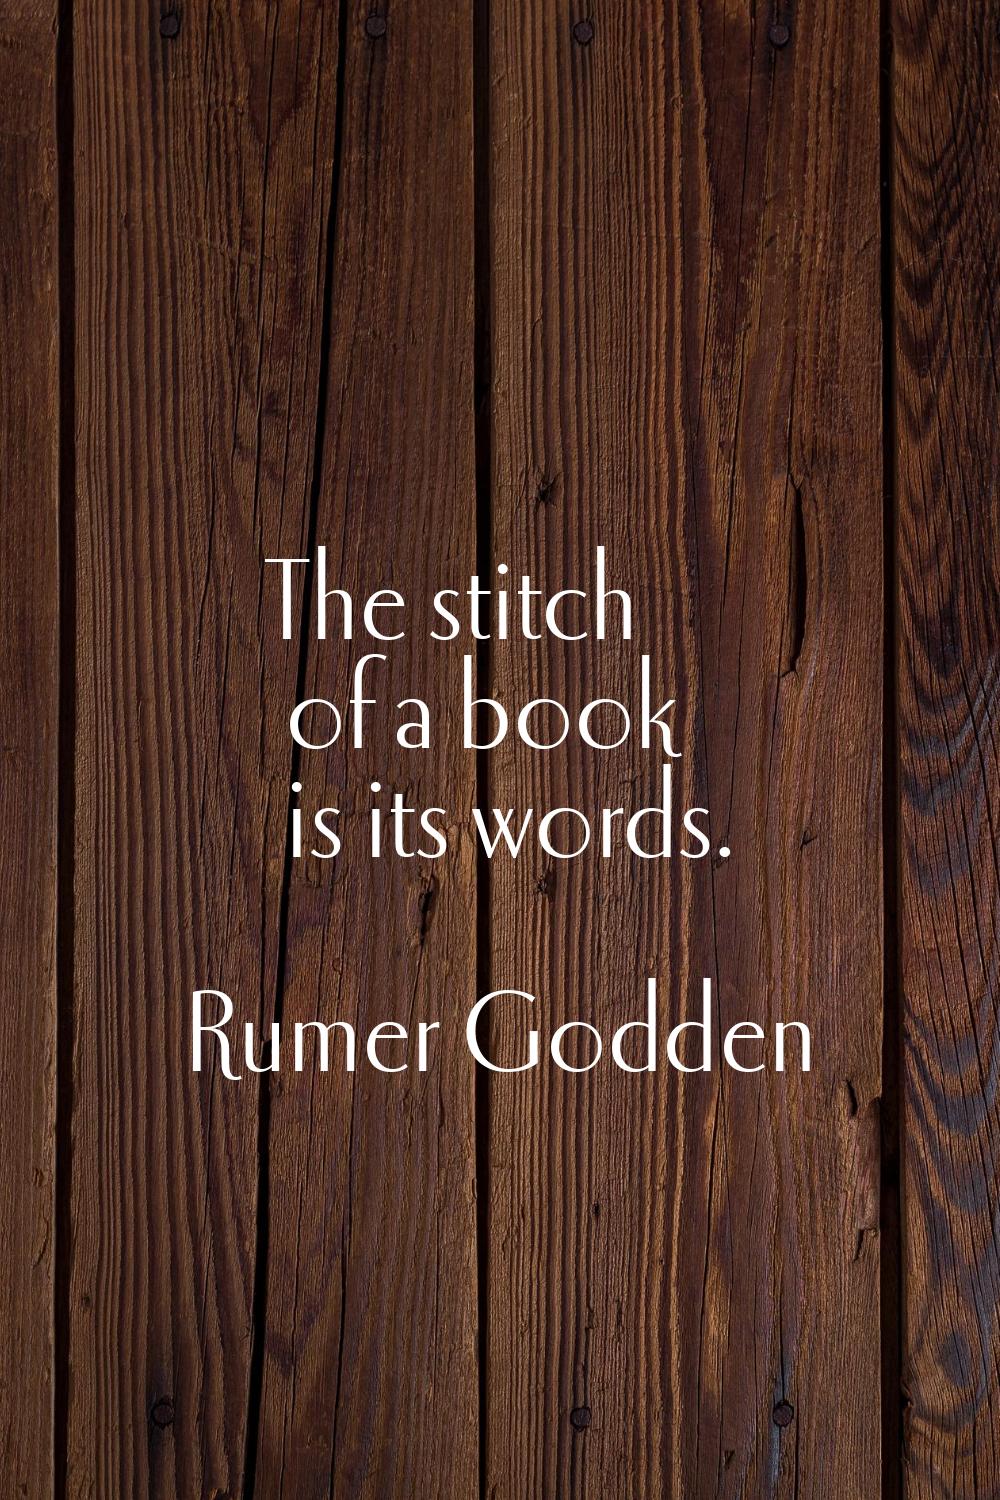 The stitch of a book is its words.